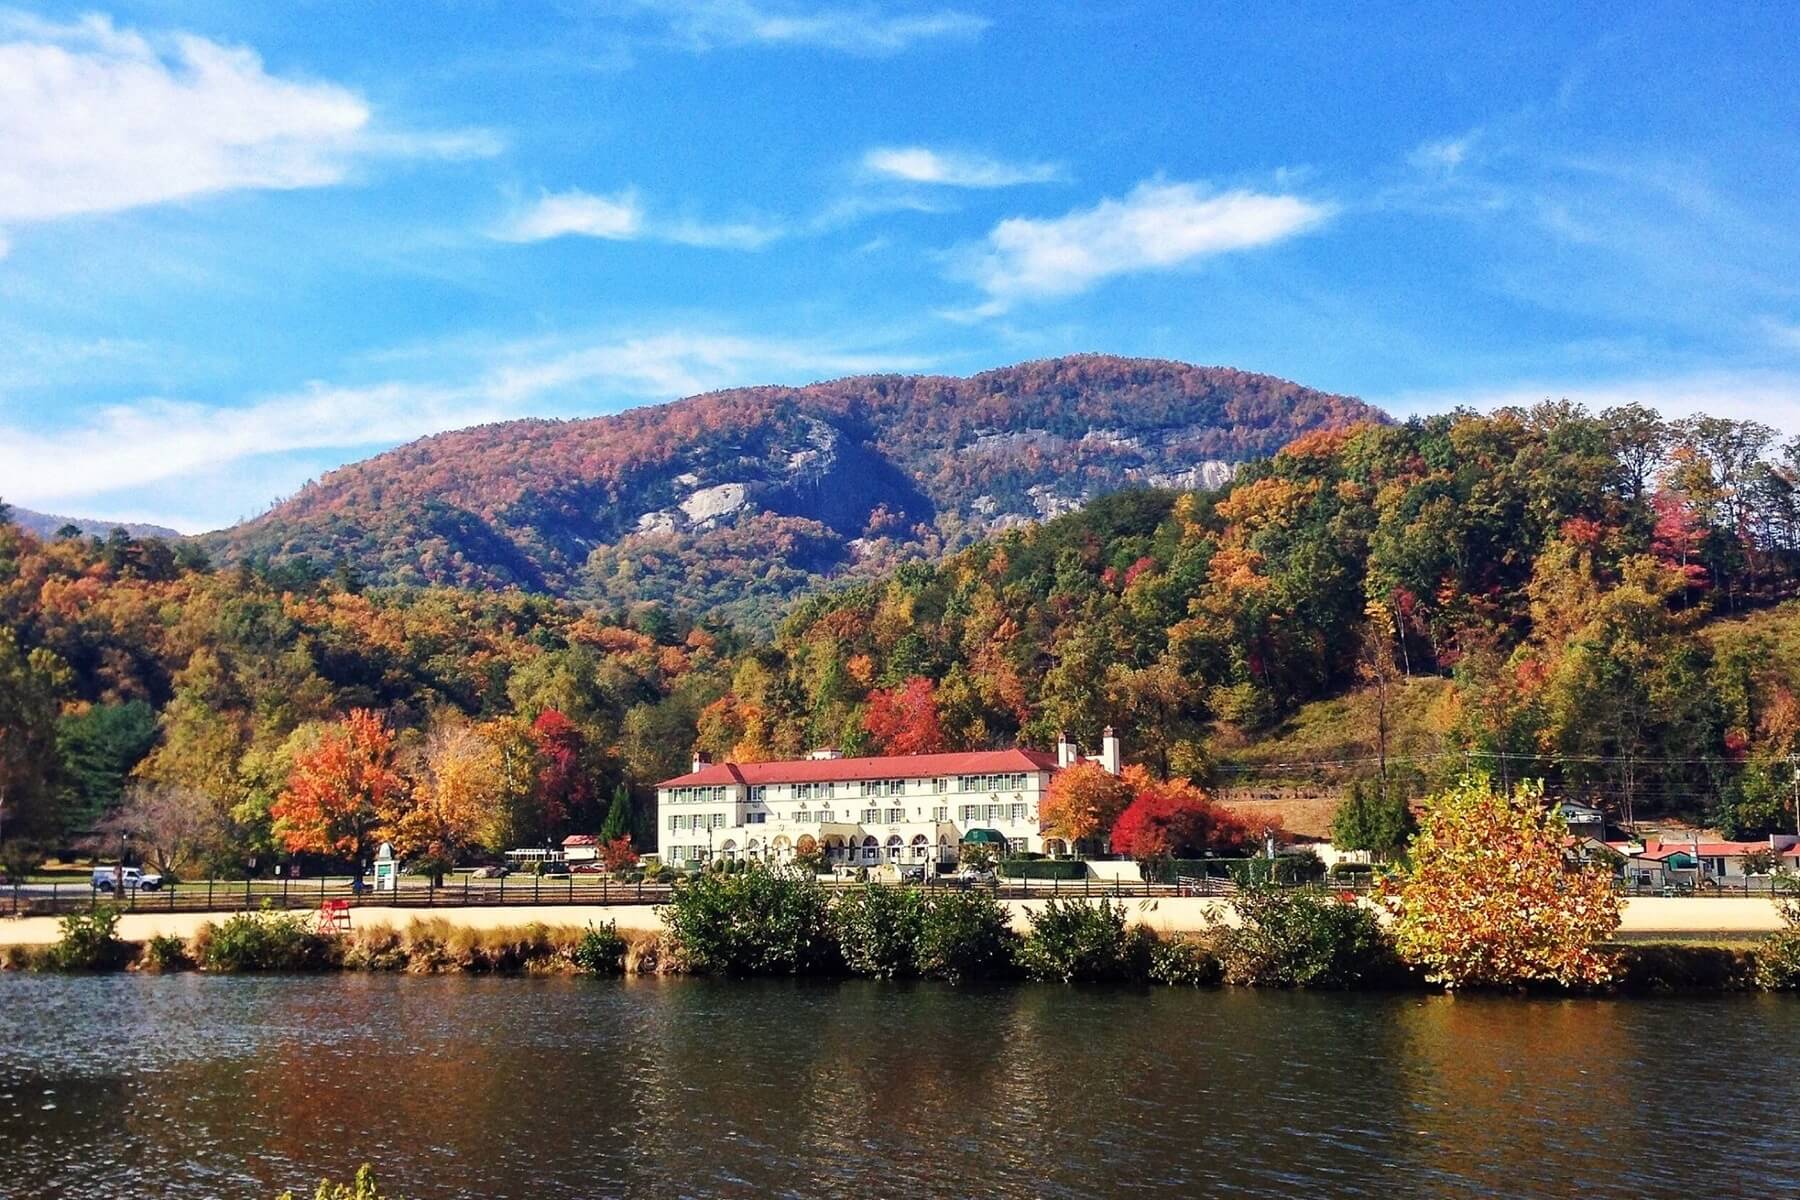 2 Days in Lake Lure, NC: The Real-Life Dirty Dancing Resort Town